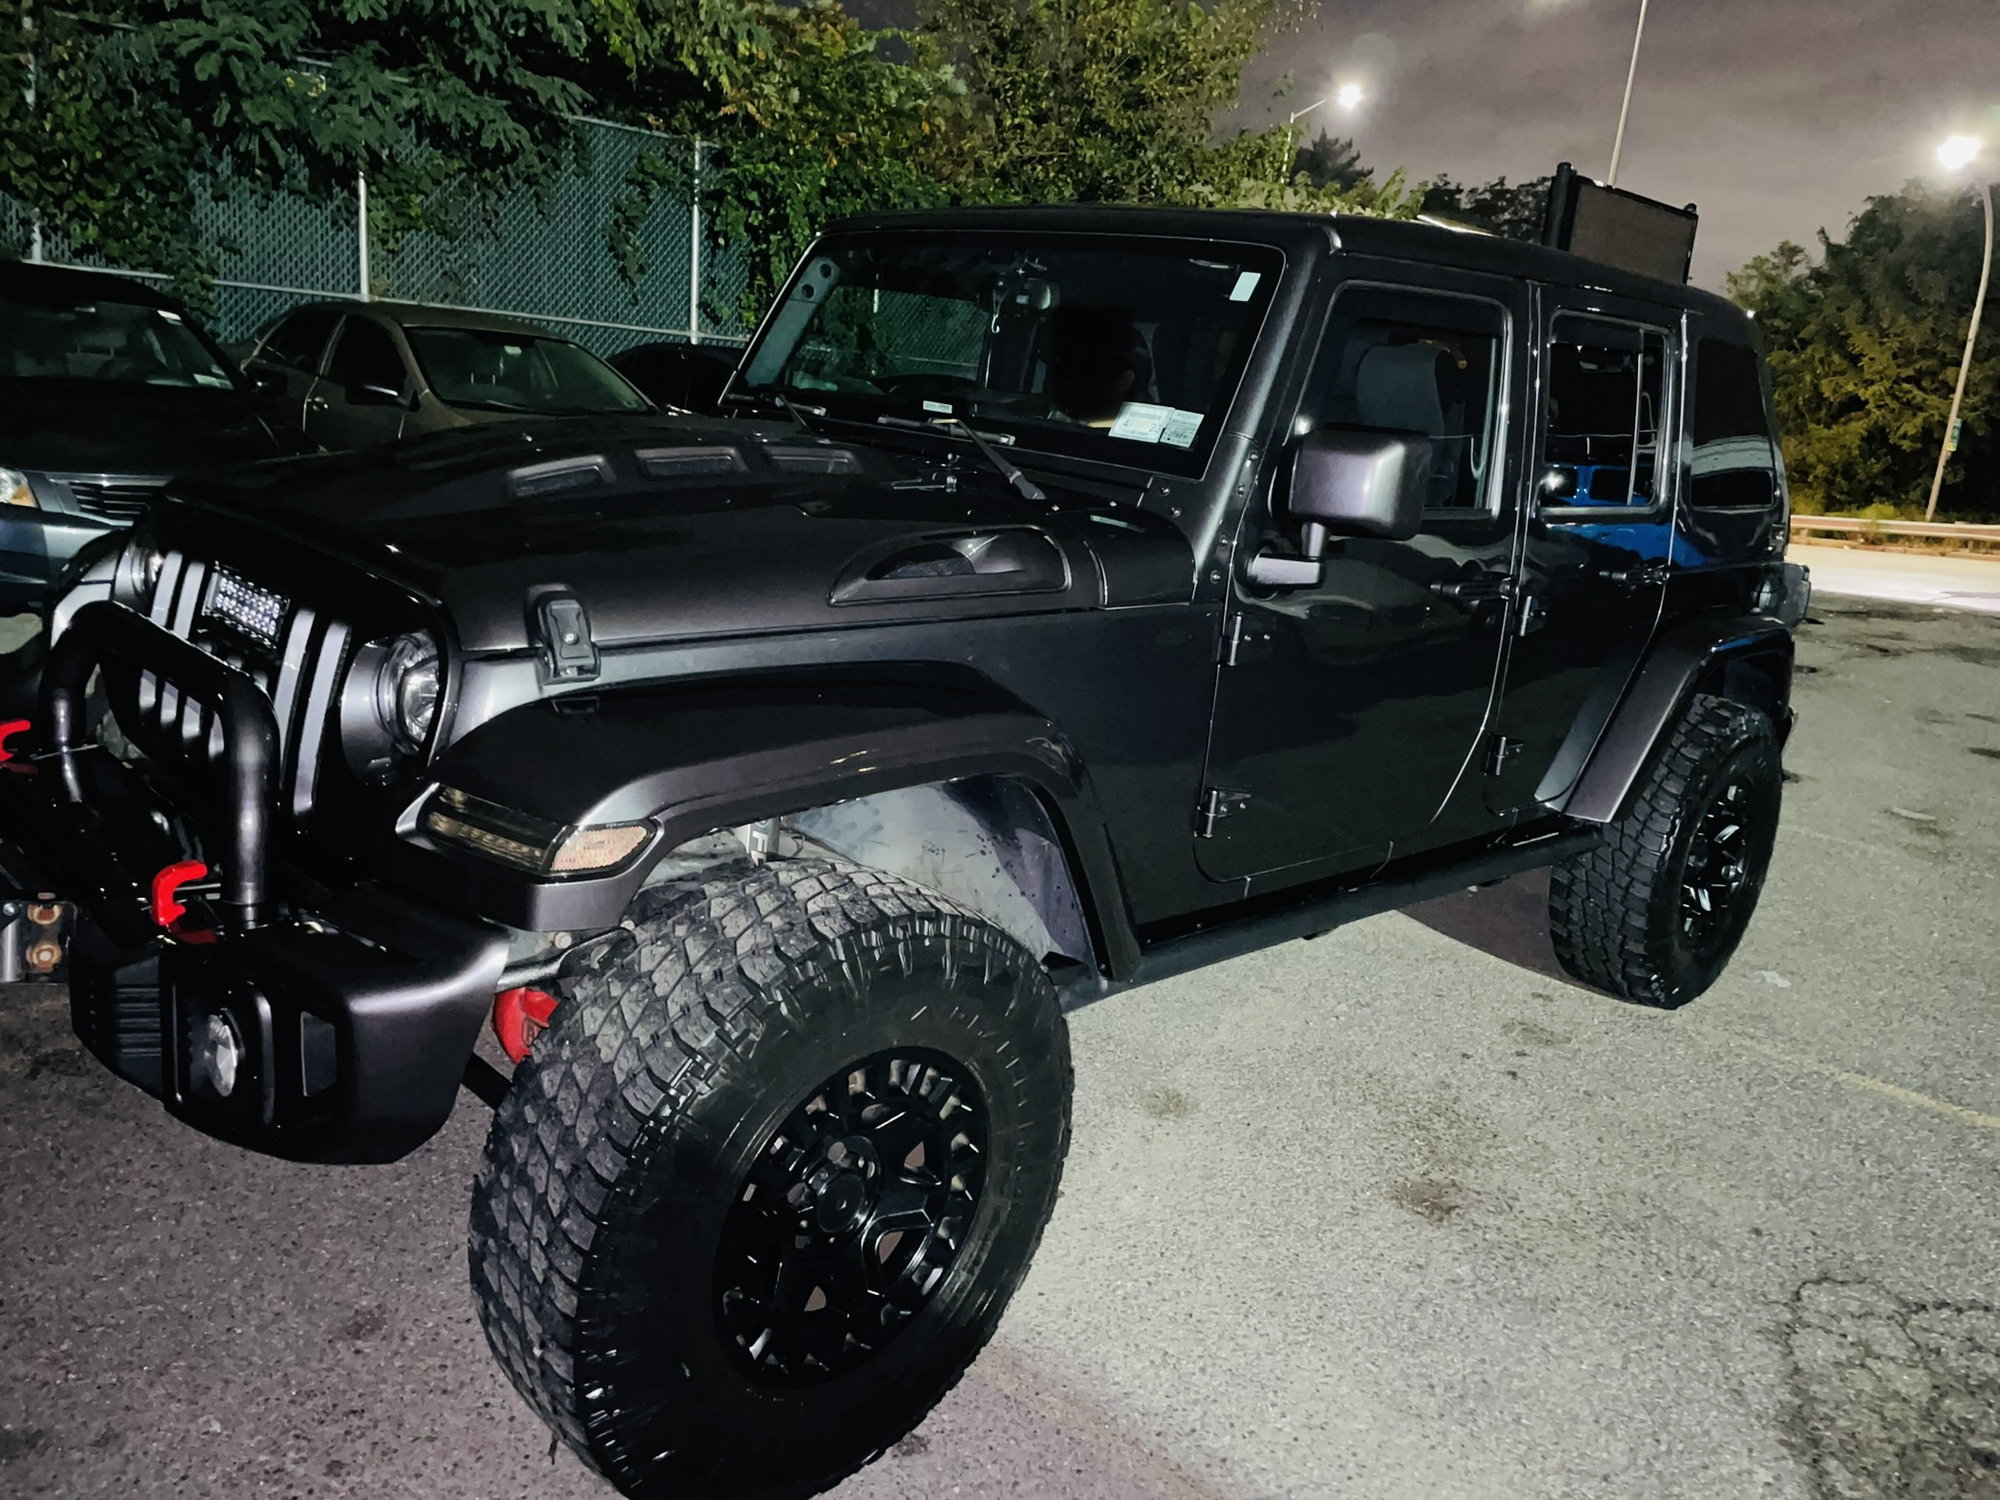 P0198 Code  - The top destination for Jeep JK and JL Wrangler  news, rumors, and discussion